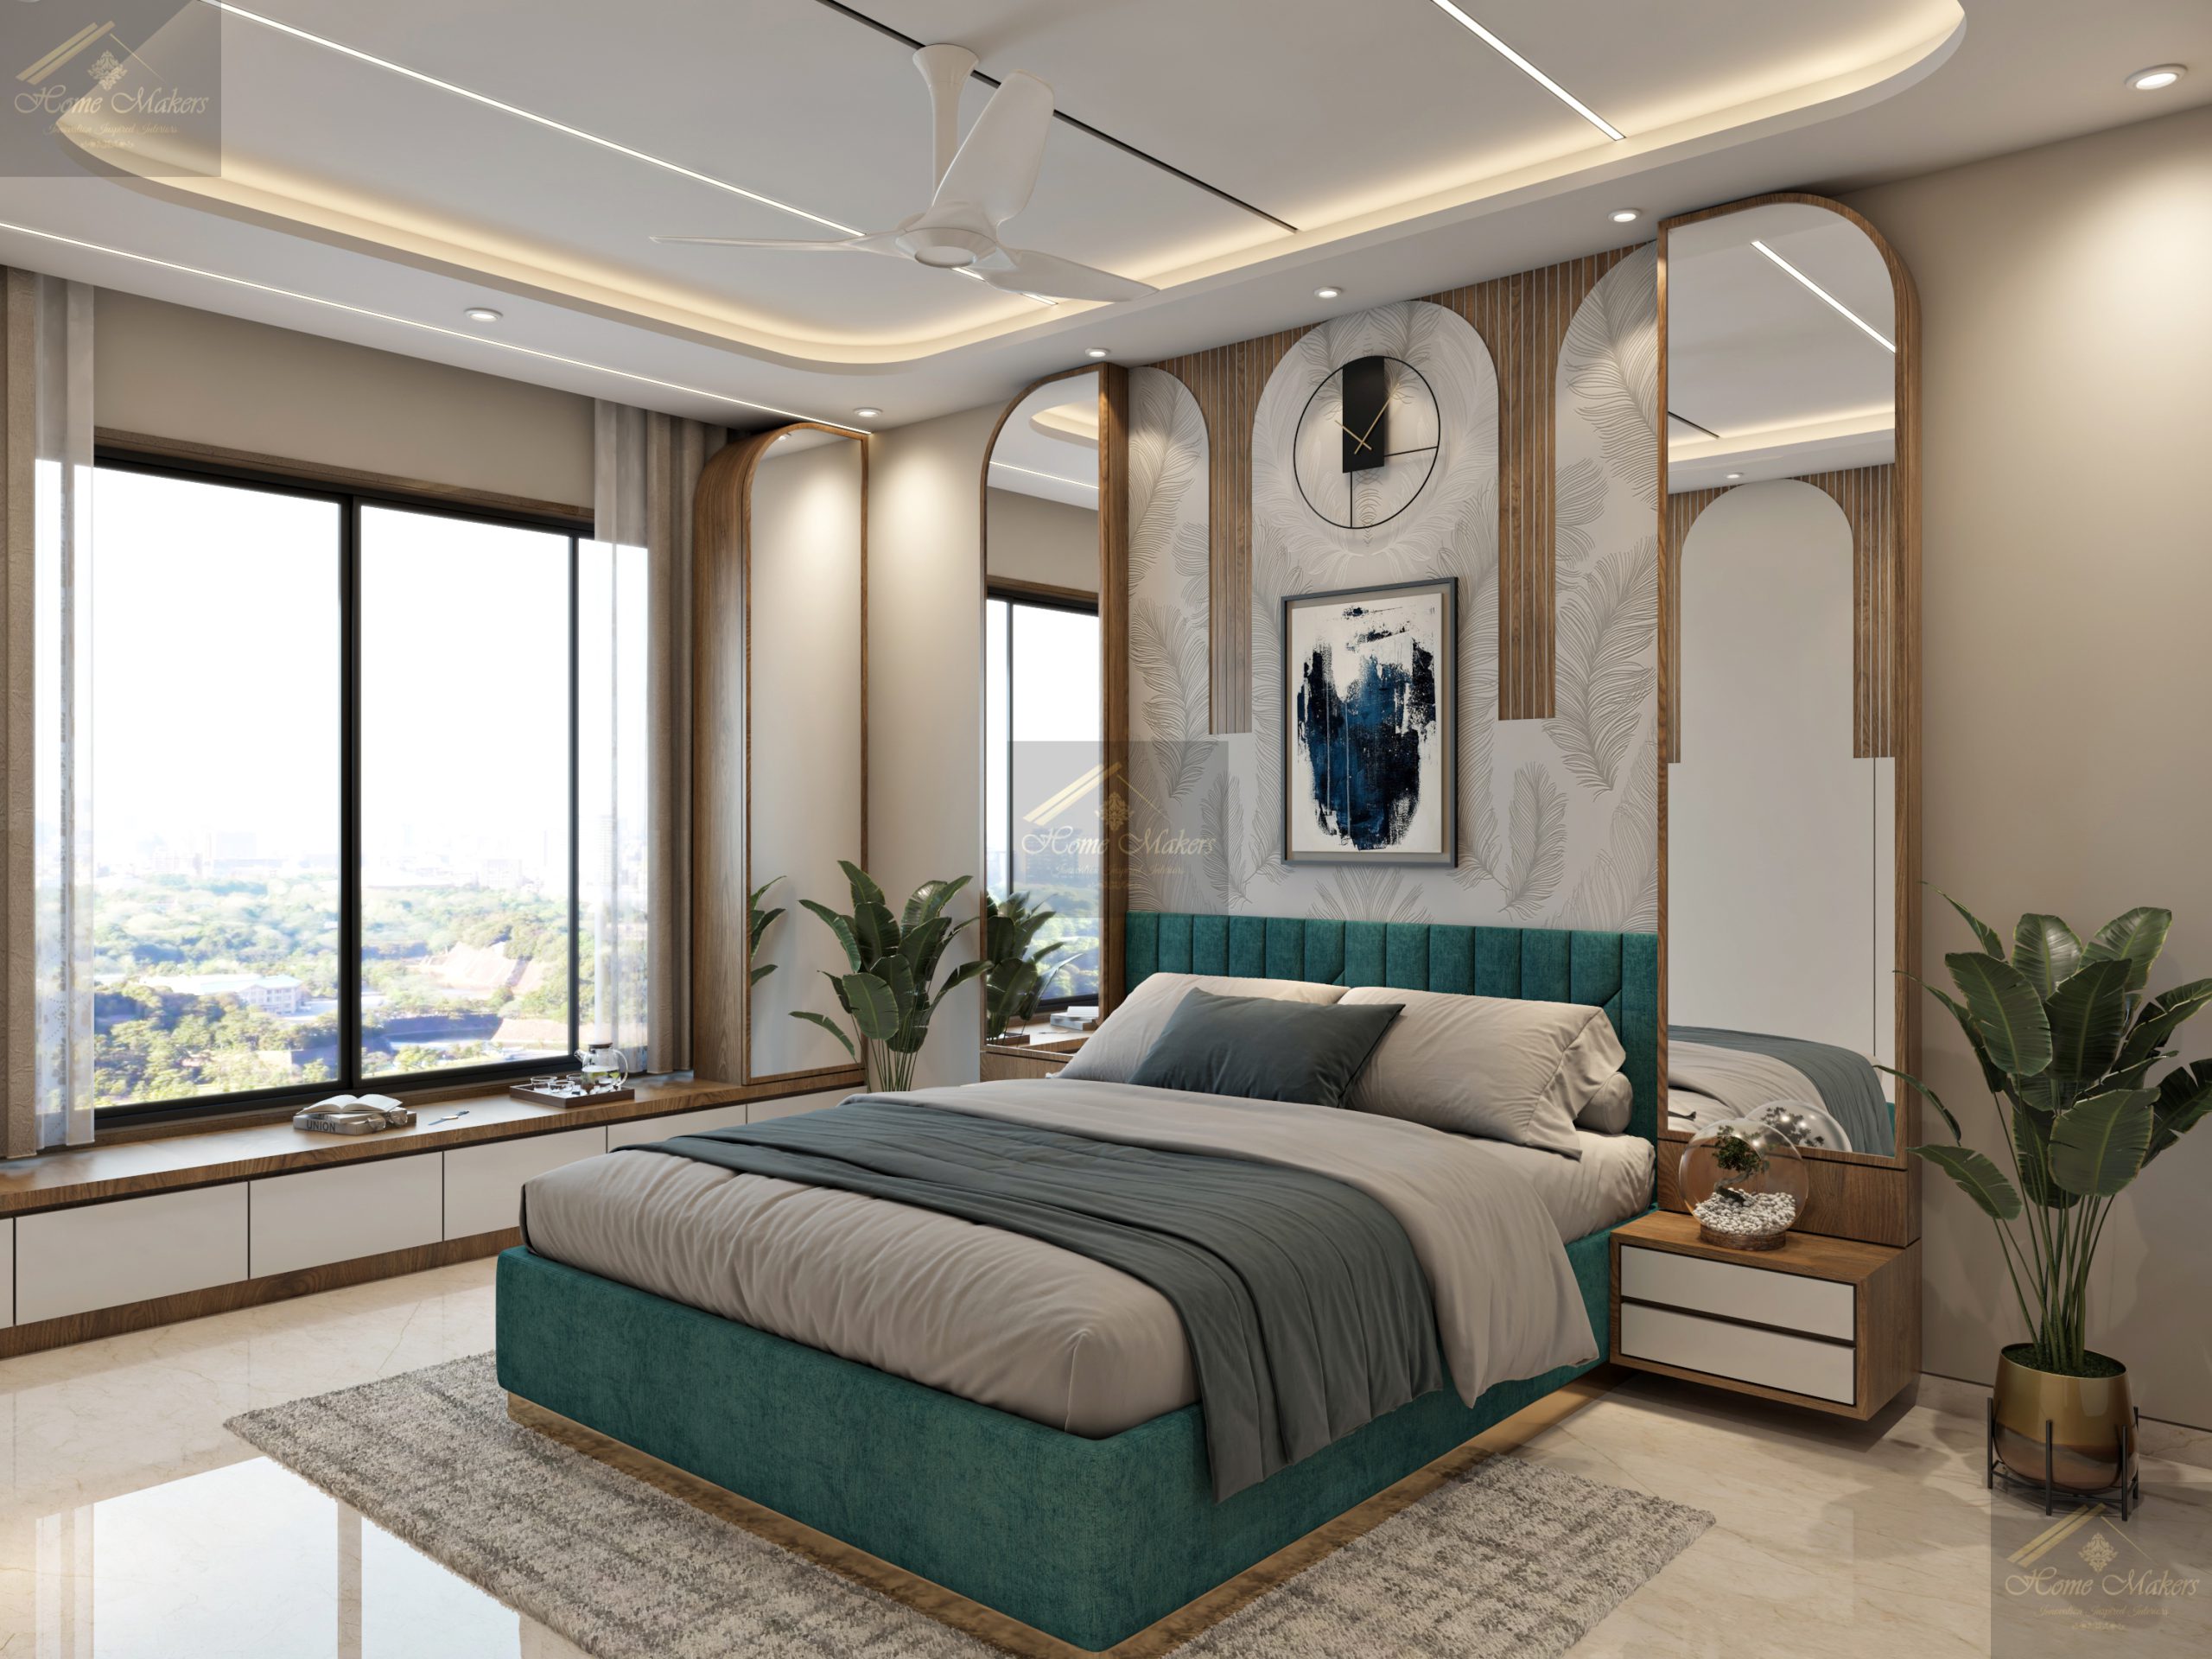 Modern 3BHK house interior with stylish furniture and decor.